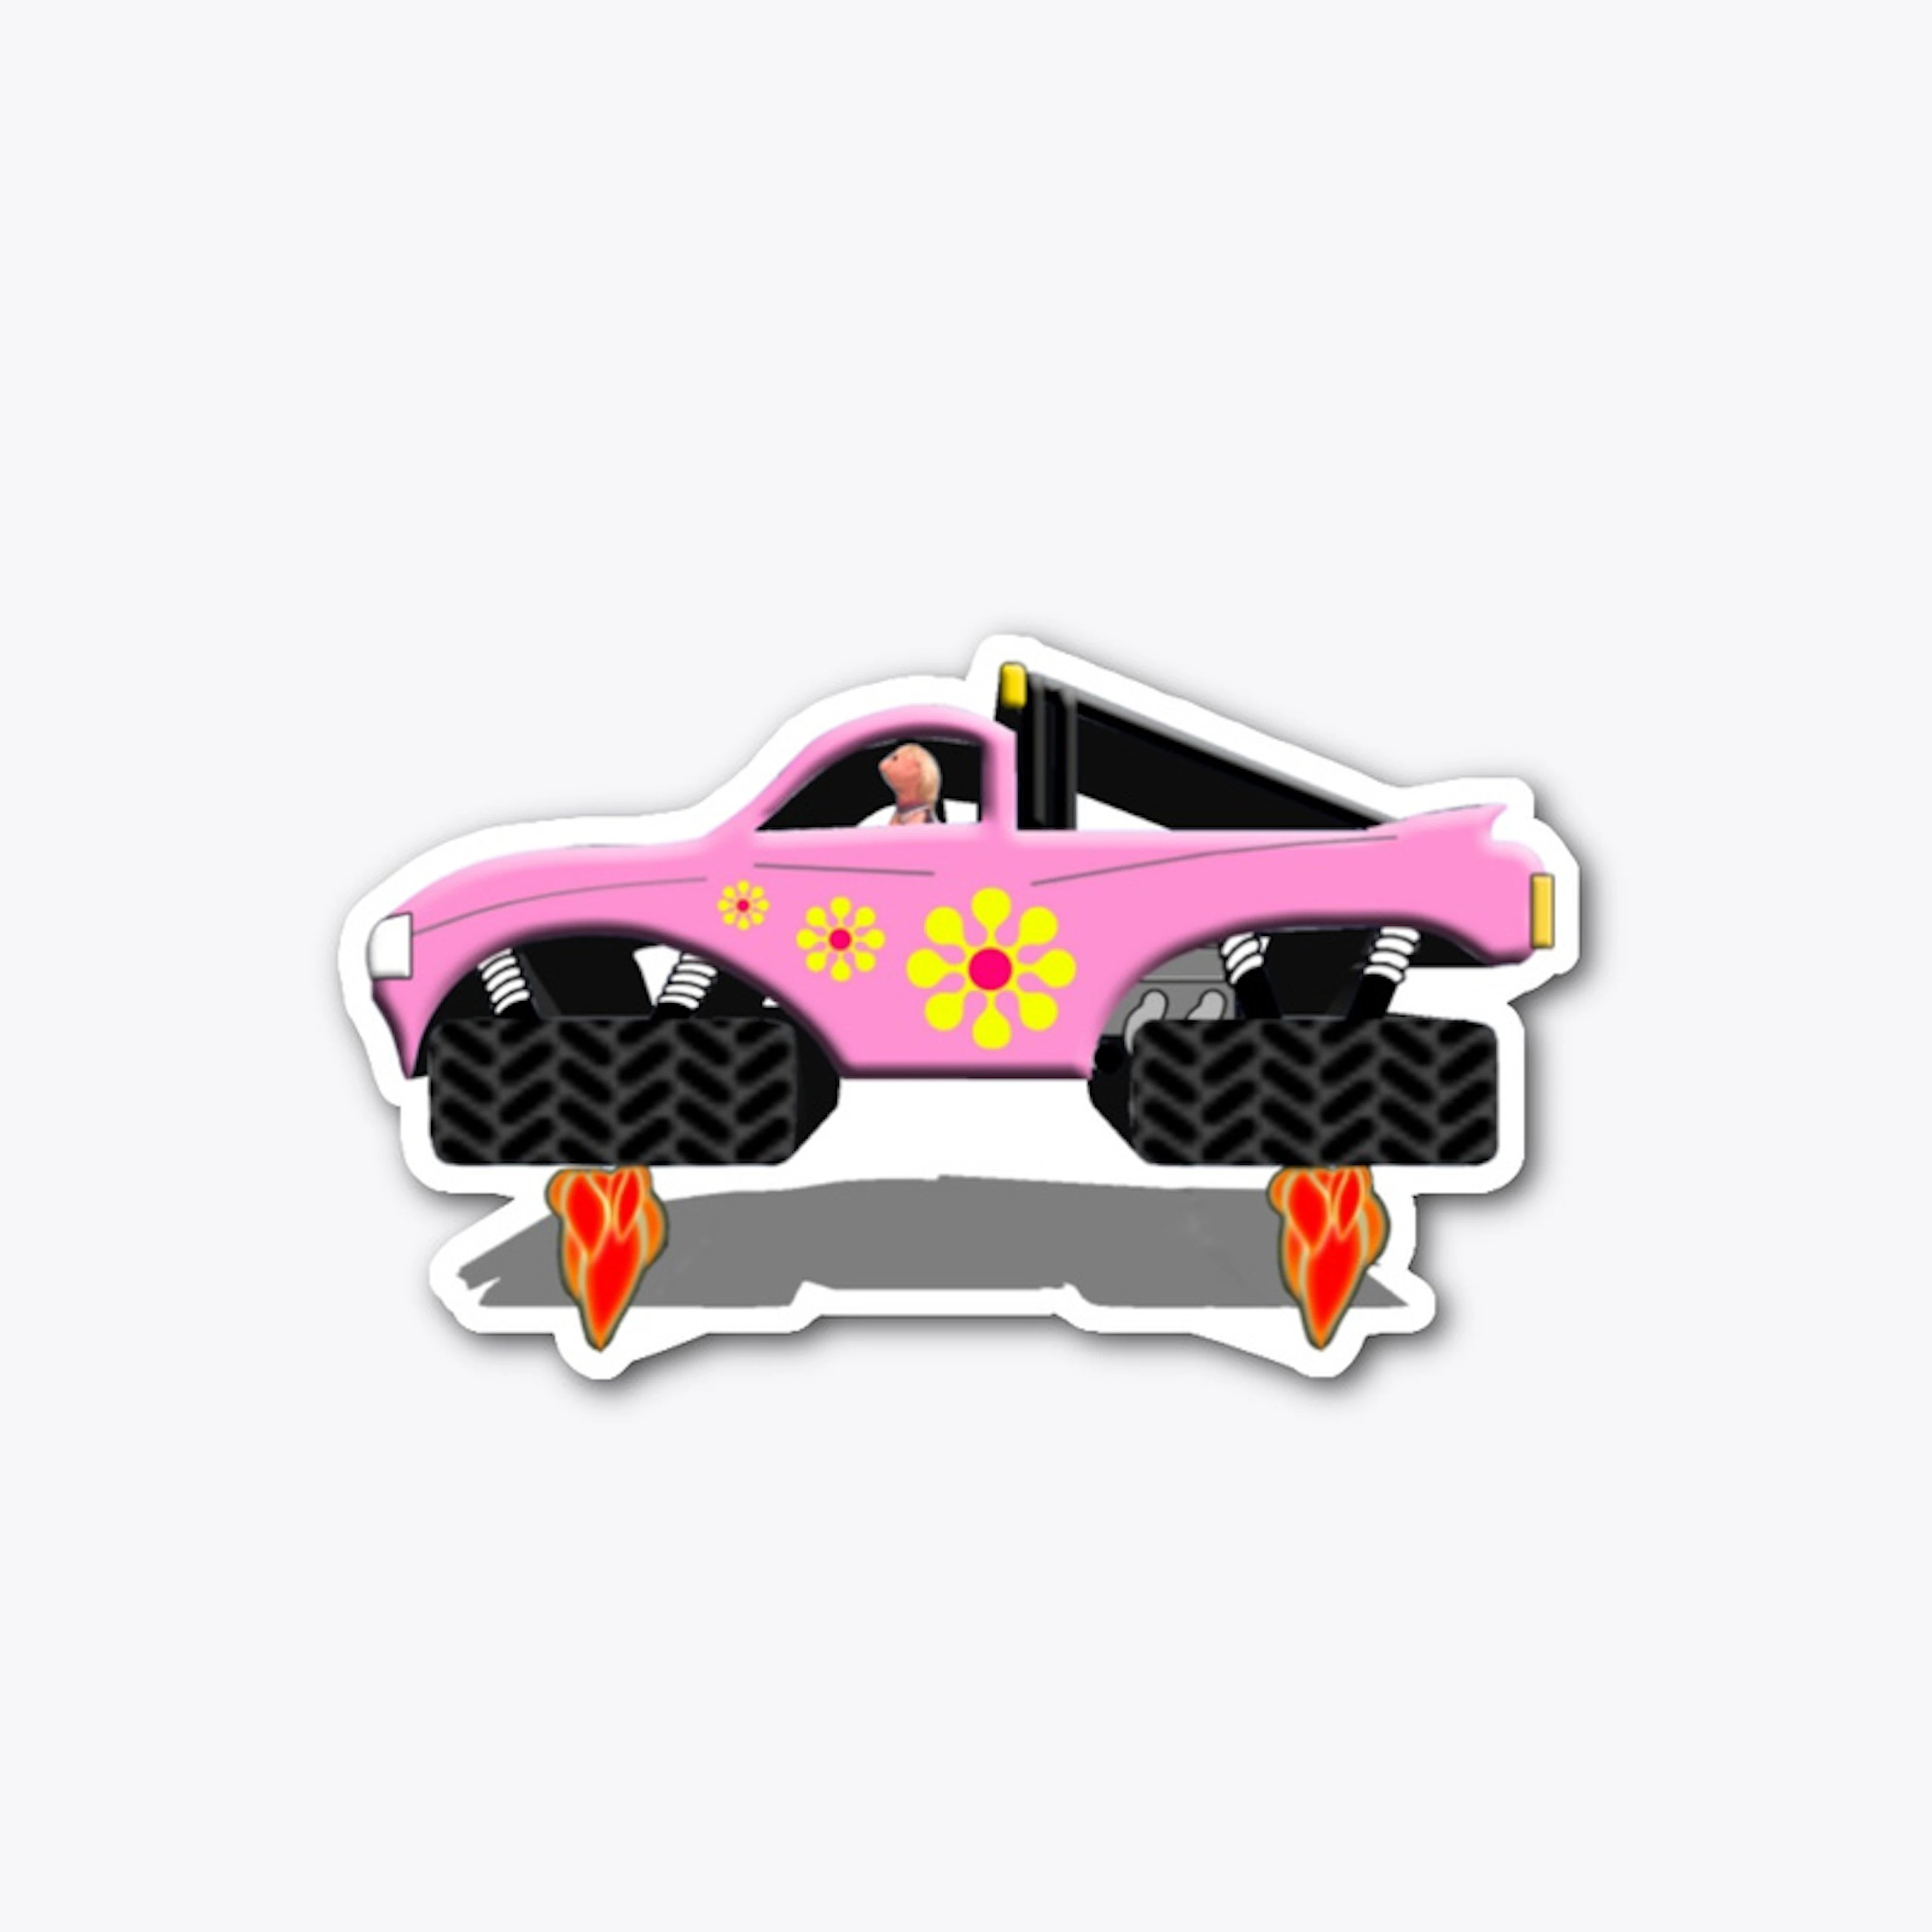 Sara's Pink Hover Truck